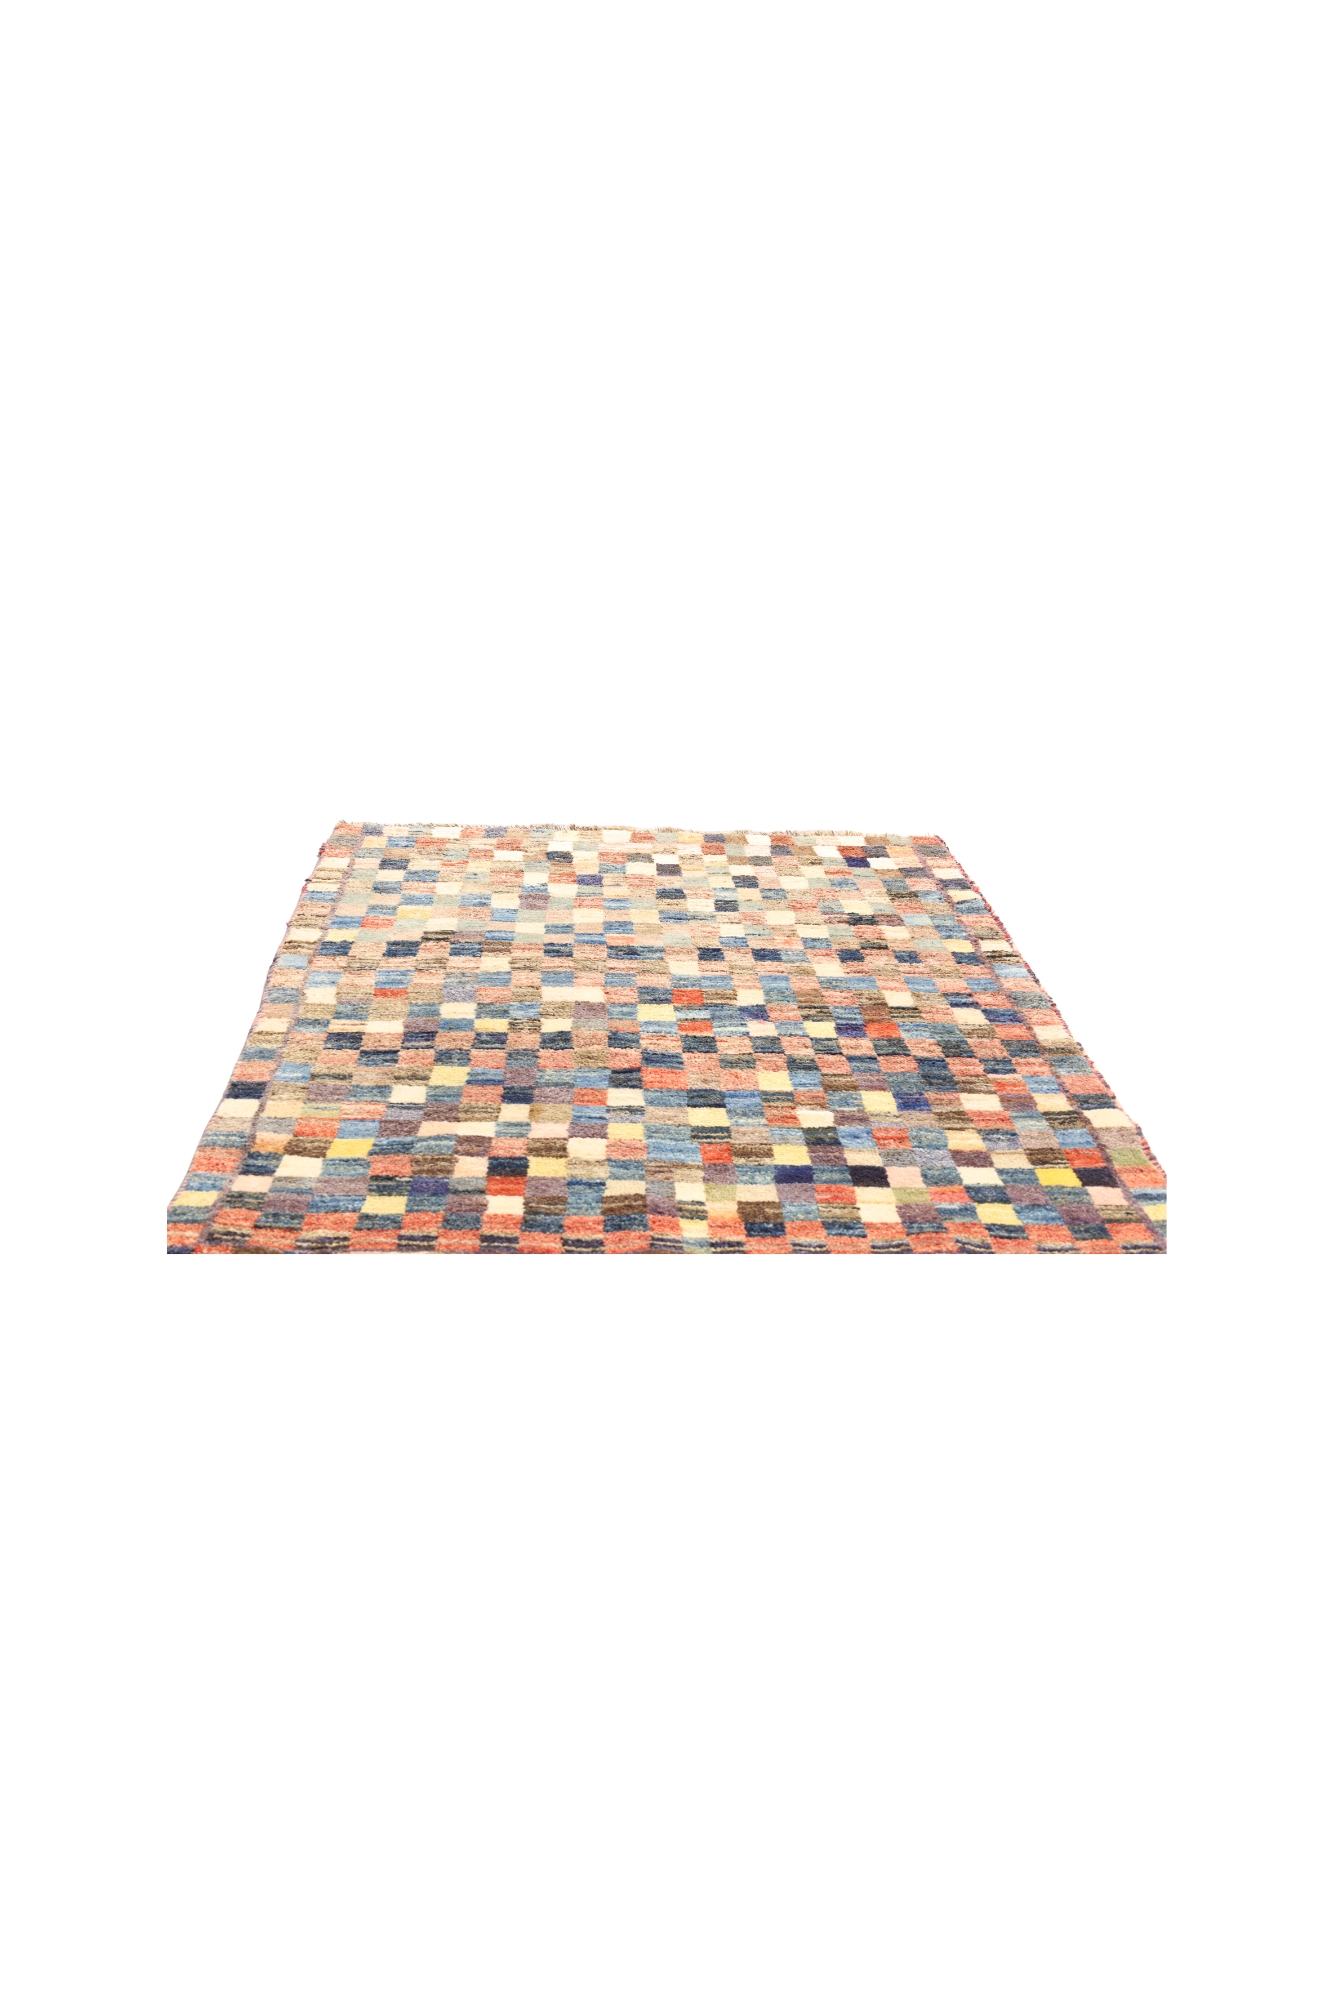 Three modern multi-coloured woolen rugs from tribal rugs Ltd, 175 x 113cm, 182 x 103cm and 165 x ... - Image 3 of 9